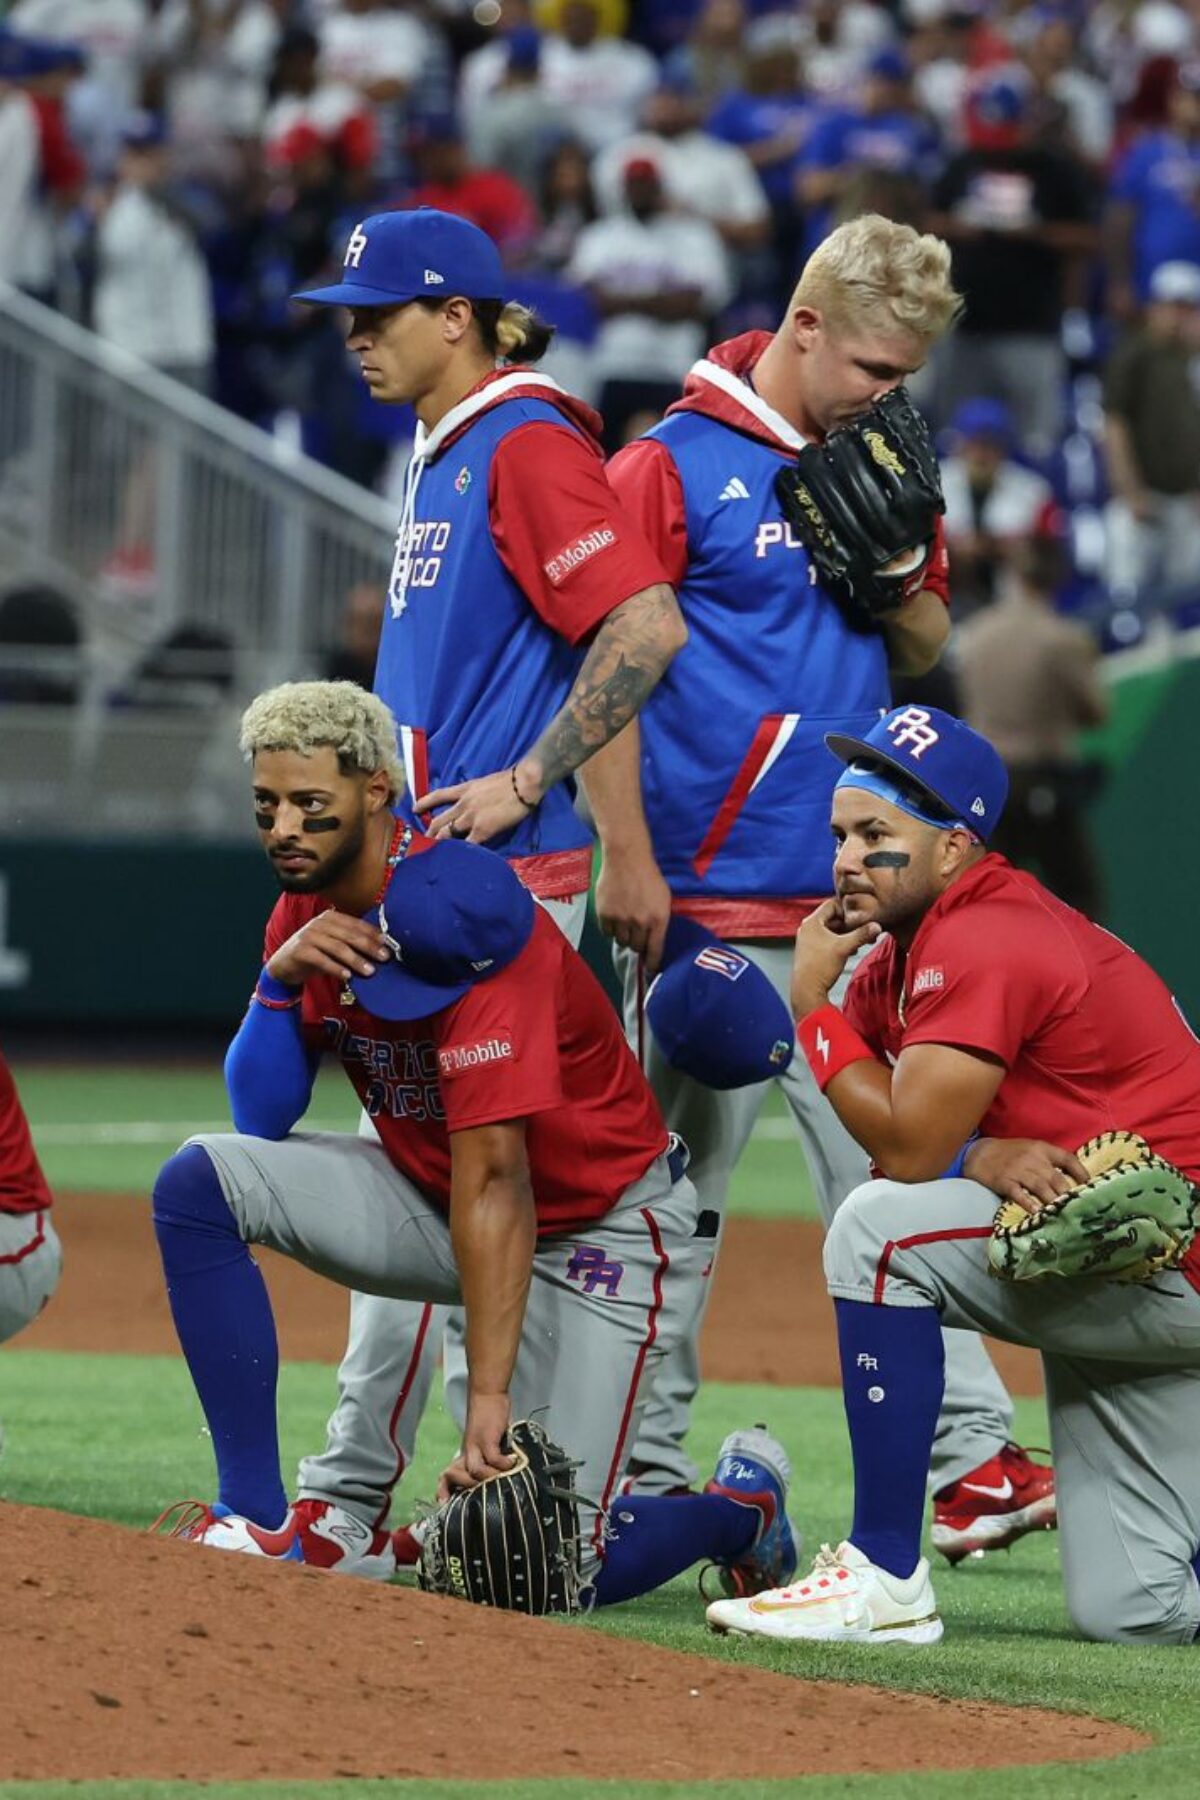 MIAMI, FLORIDA - MARCH 15: Members of Team Puerto Rico look on after Edwin Diaz #39 of Team Puerto Rico leaves the field in a wheelchair after sustaining an injury while celebrating a 5-2 win against Team Dominican Republic during their World Baseball Classic Pool D game at loanDepot park on March 15, 2023 in Miami, Florida. (Photo by Al Bello/Getty Images)